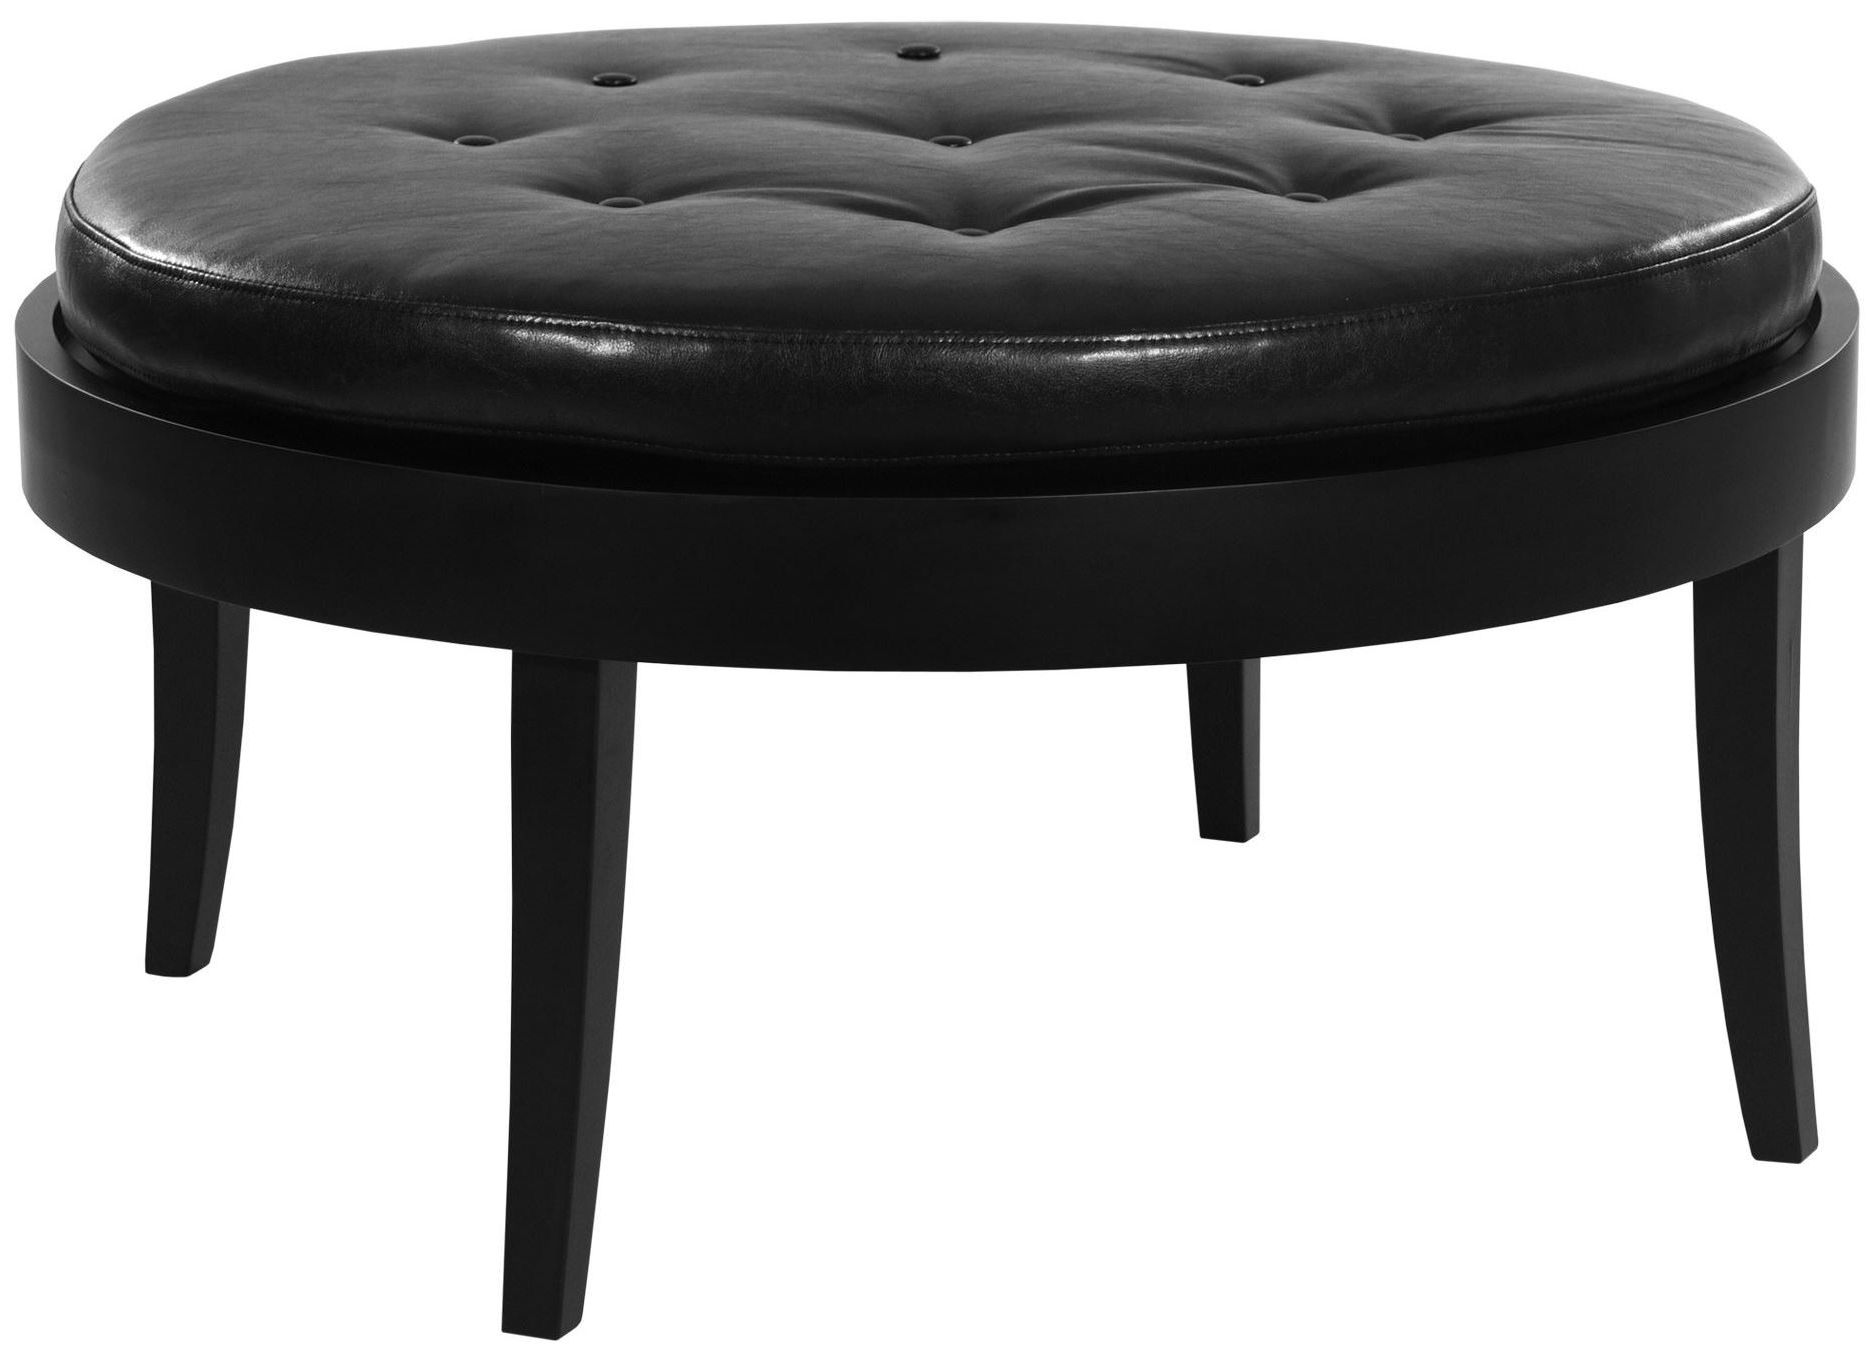 Citation Black Tufted Leather Ottoman, Lc6023otbcbl, Armen Living With Regard To Current Black Leather Ottomans (View 10 of 10)